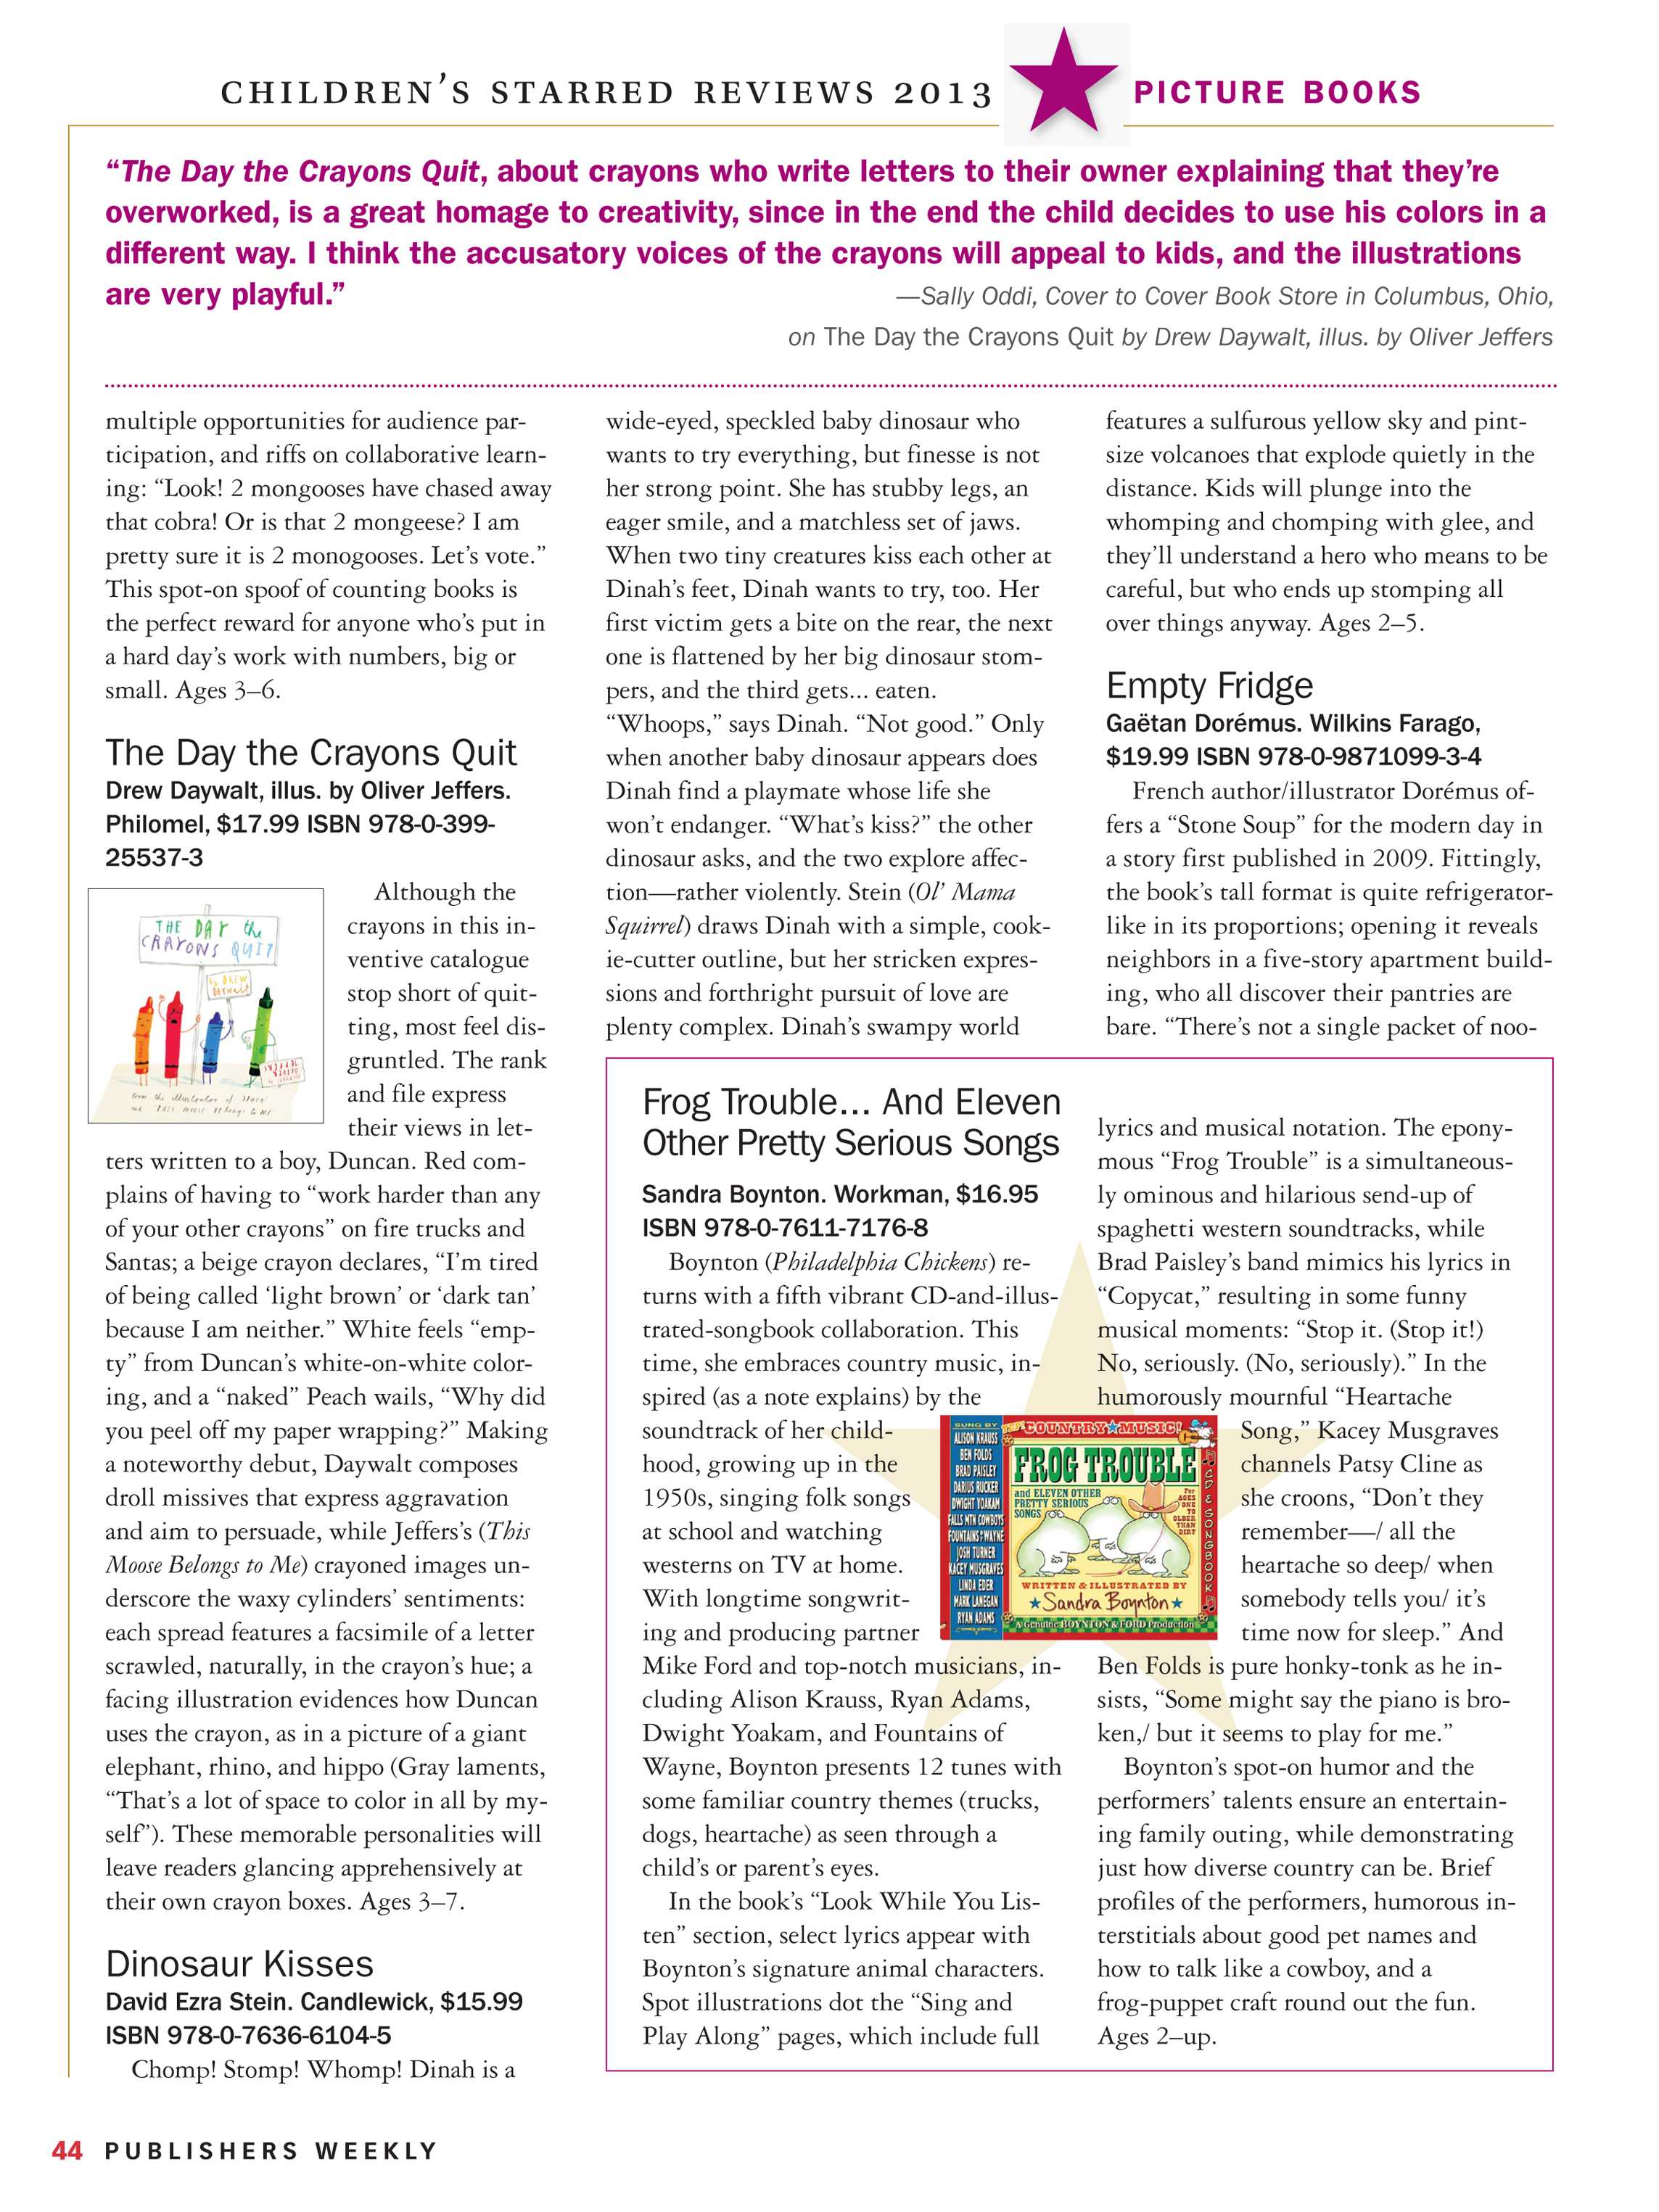 Publishers Weekly - Children's Starred Reviews Annual 2013 - page 44